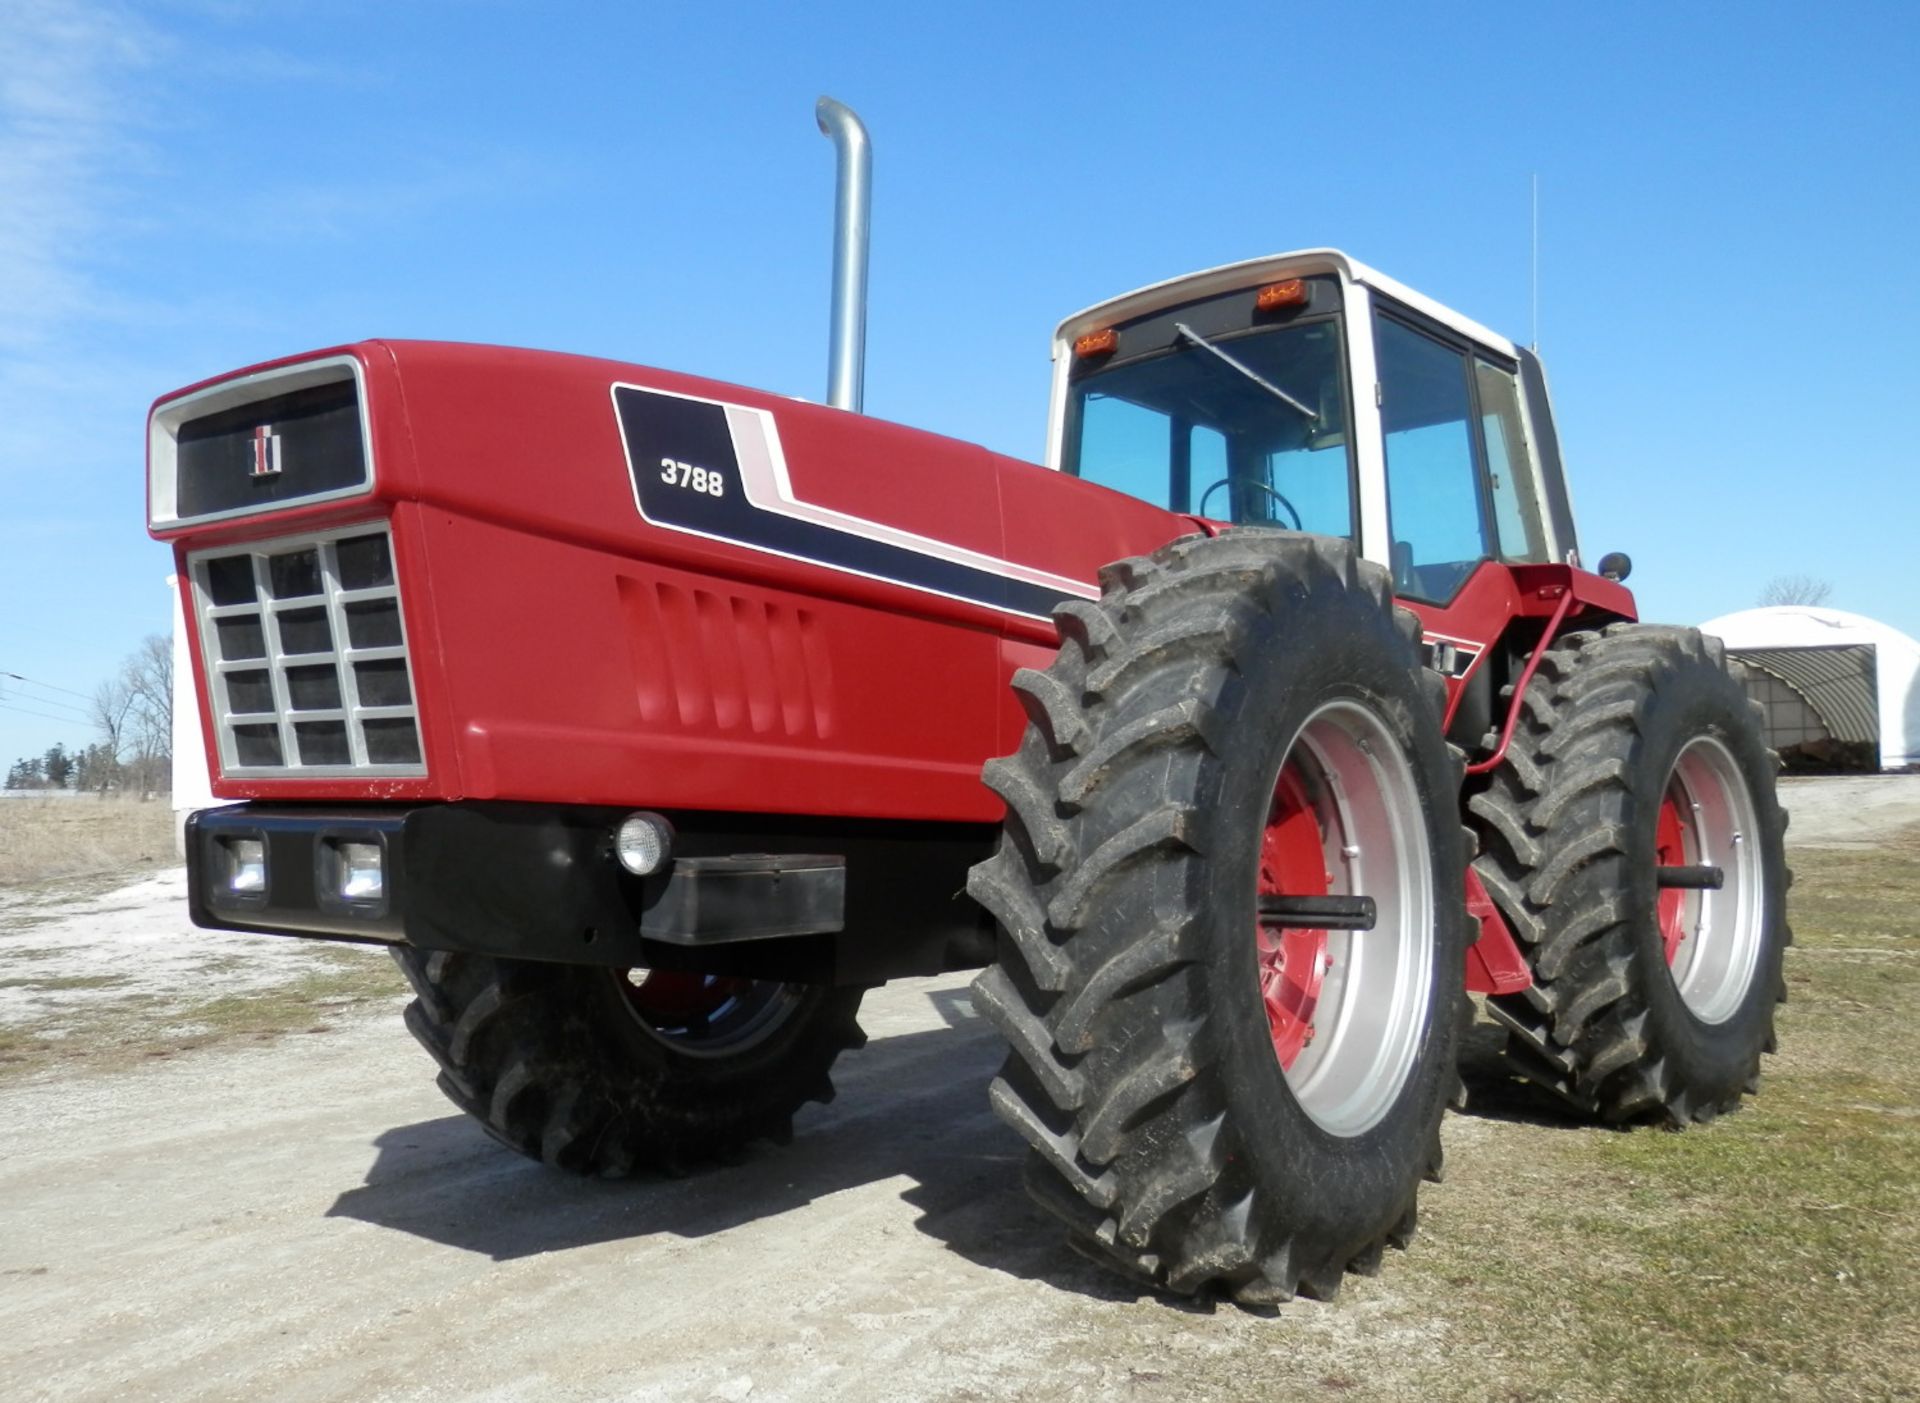 IH 3788 2+2 4x4 TRACTOR, SN 9088 - Image 3 of 21